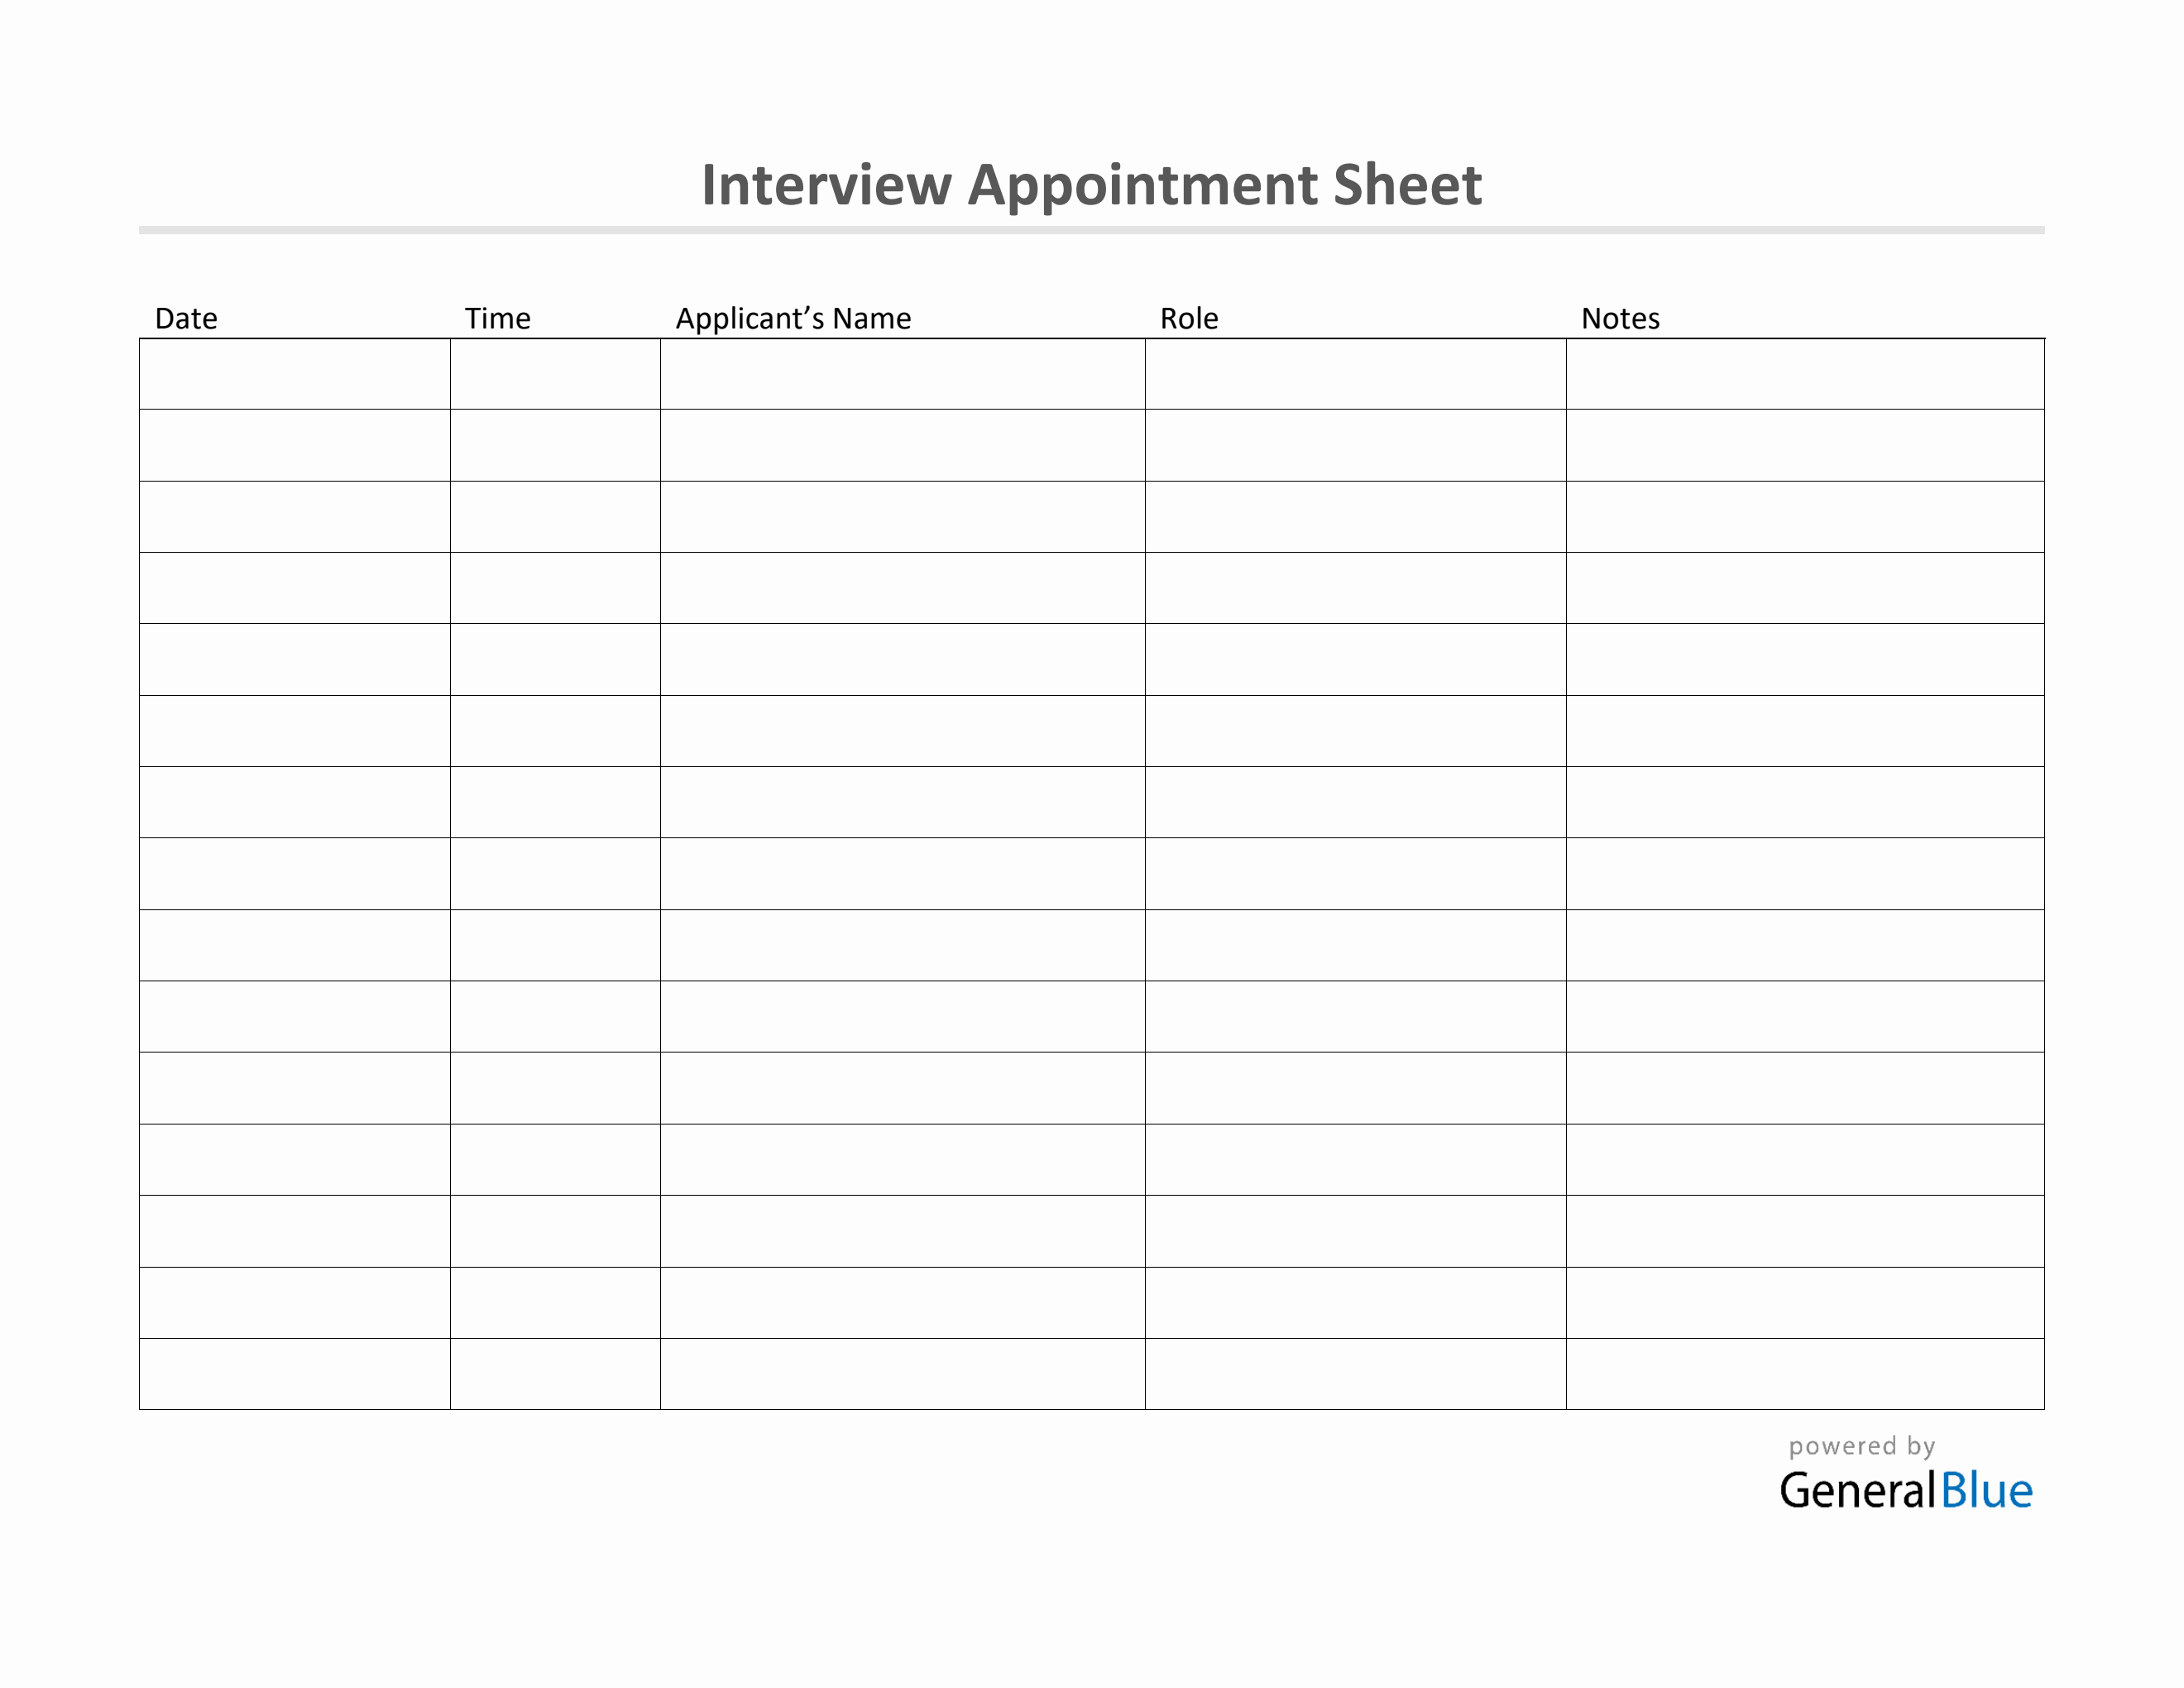 interview appointment sheet template in word basic